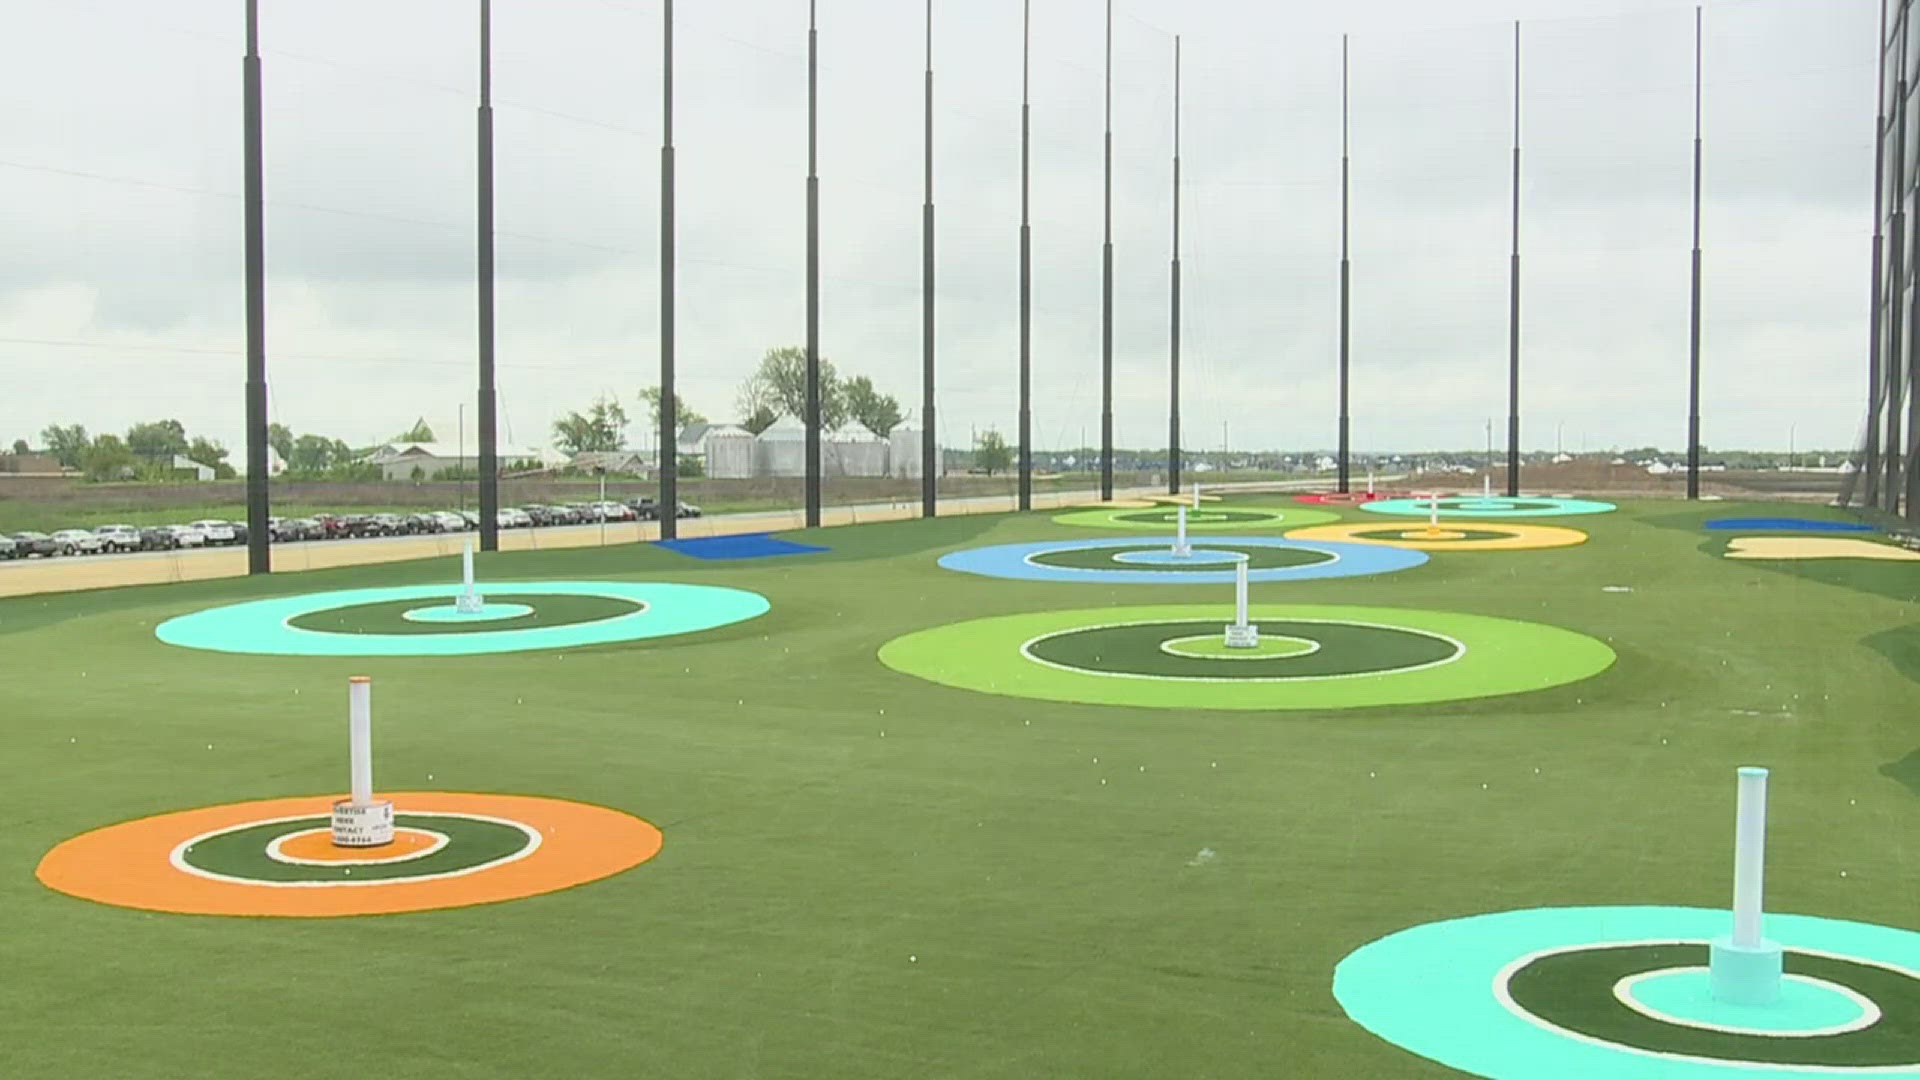 The new entertainment center for golf lovers has brought over 200 new jobs to the area.